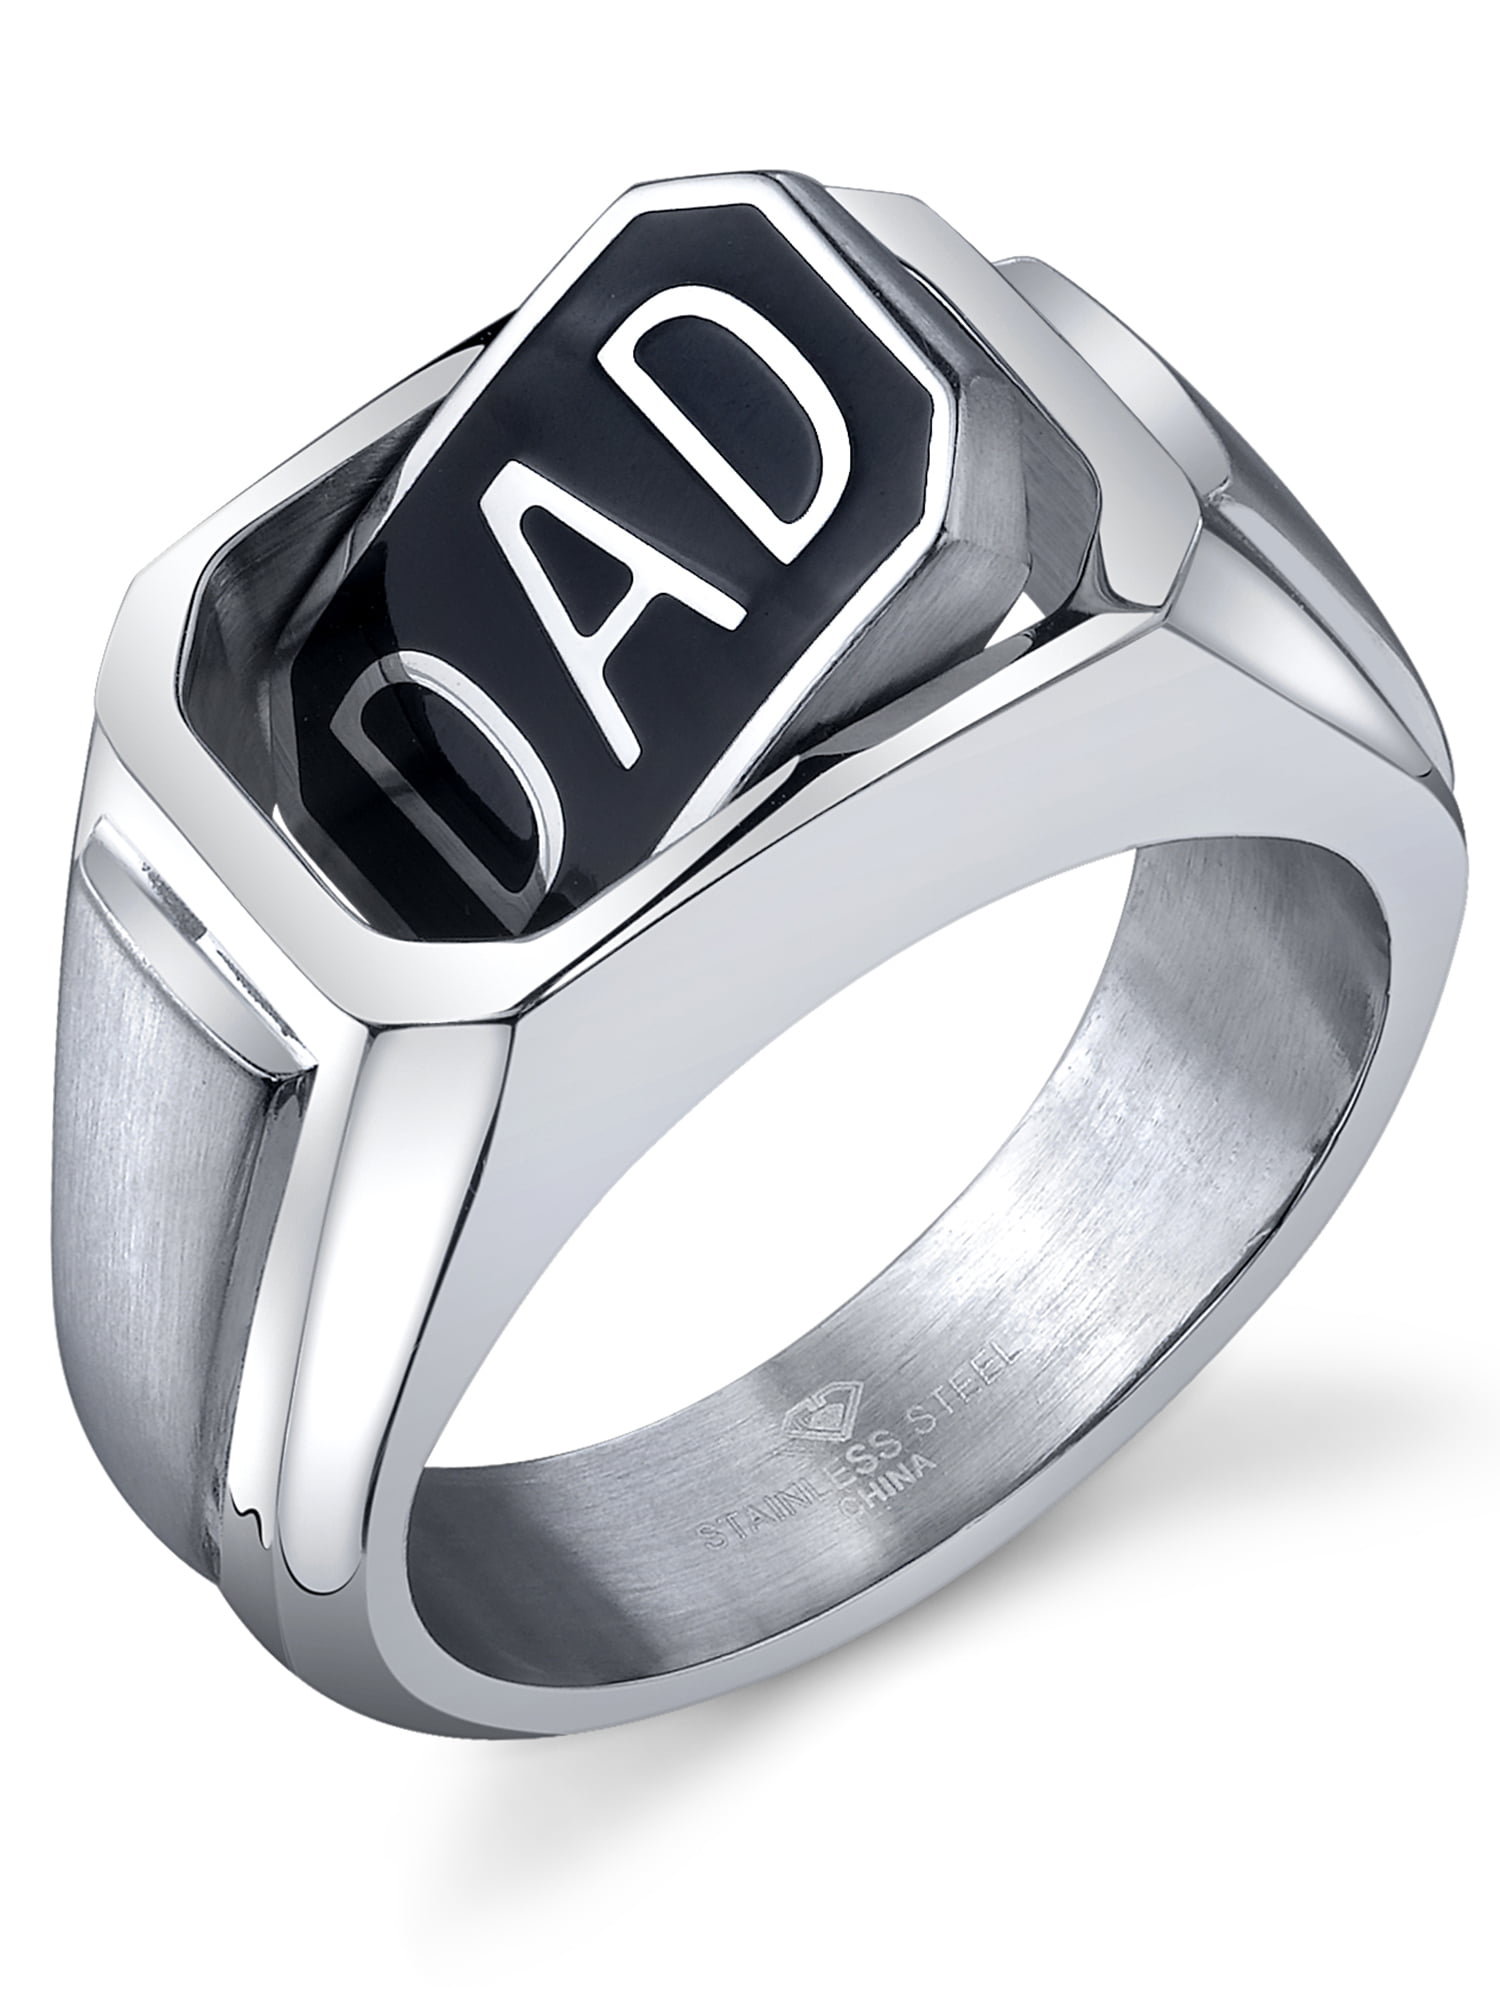 Men s Stainless Steel Diamond Accent DAD Flip Ring Perfect gift for Father s Day Mens ffc69f16 3516 4526 bda6 16572a093413 1.b3d2587e0de483b78b7b77033f100422